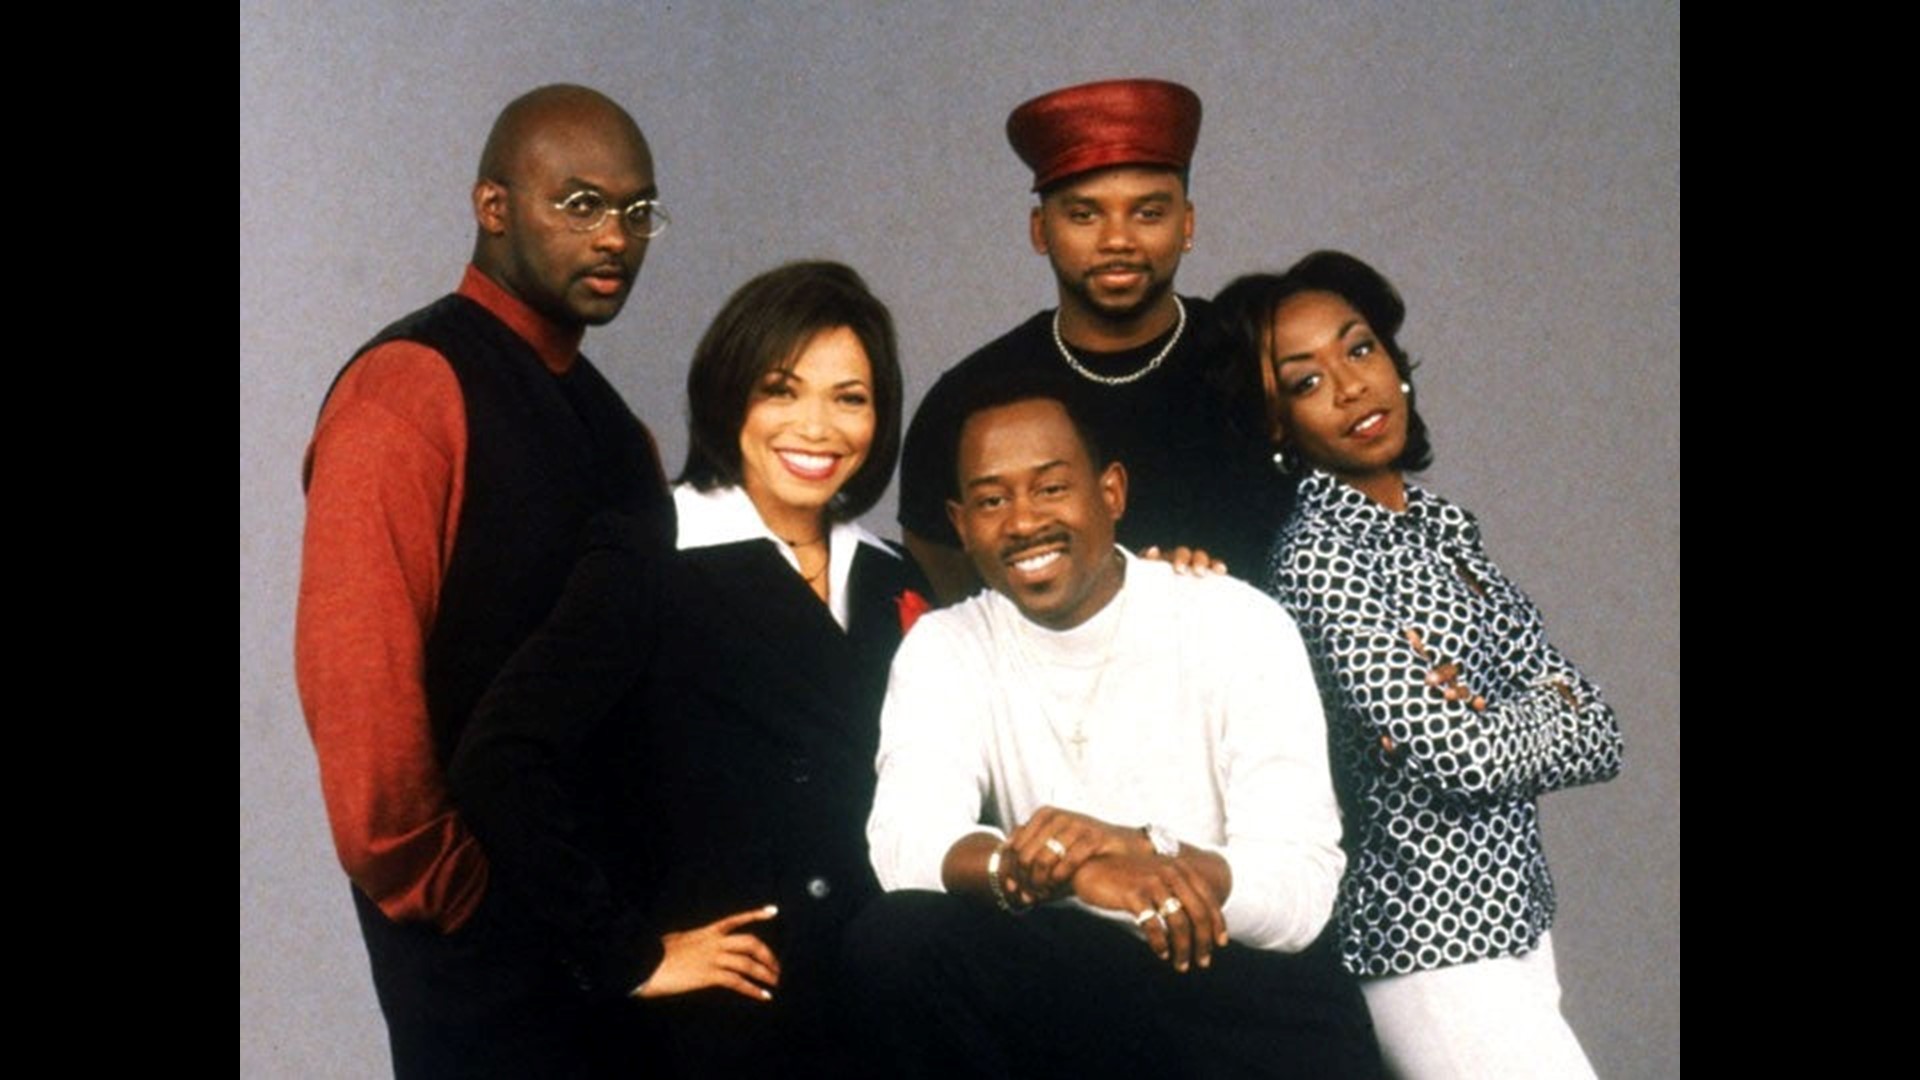 How to Watch the Best Black From the ‘90s & Early ‘00s